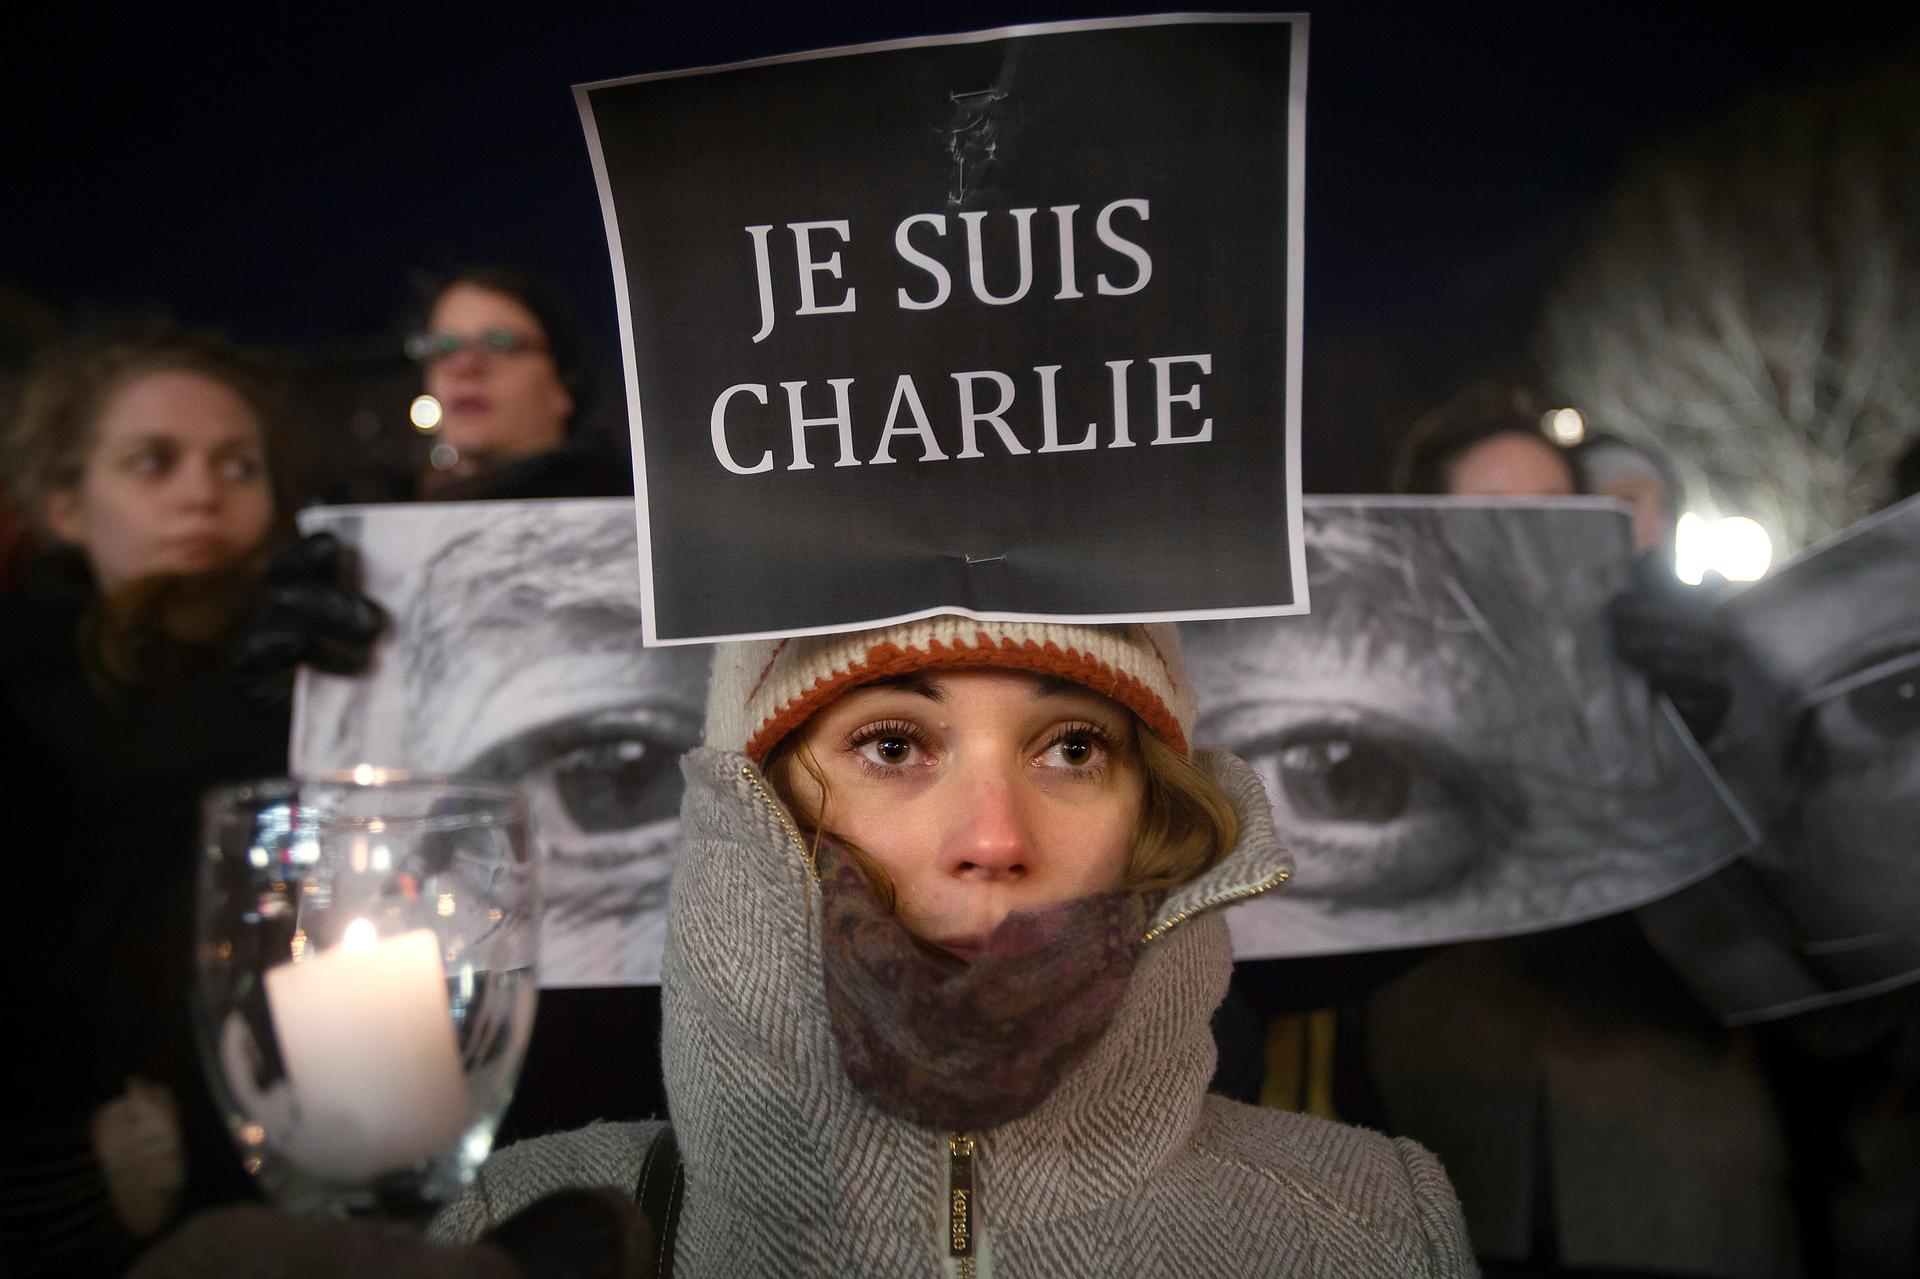 Armandine Marbach takes part in a demonstration on January 7, 2014, supporting the French publication Charlie Hebdo